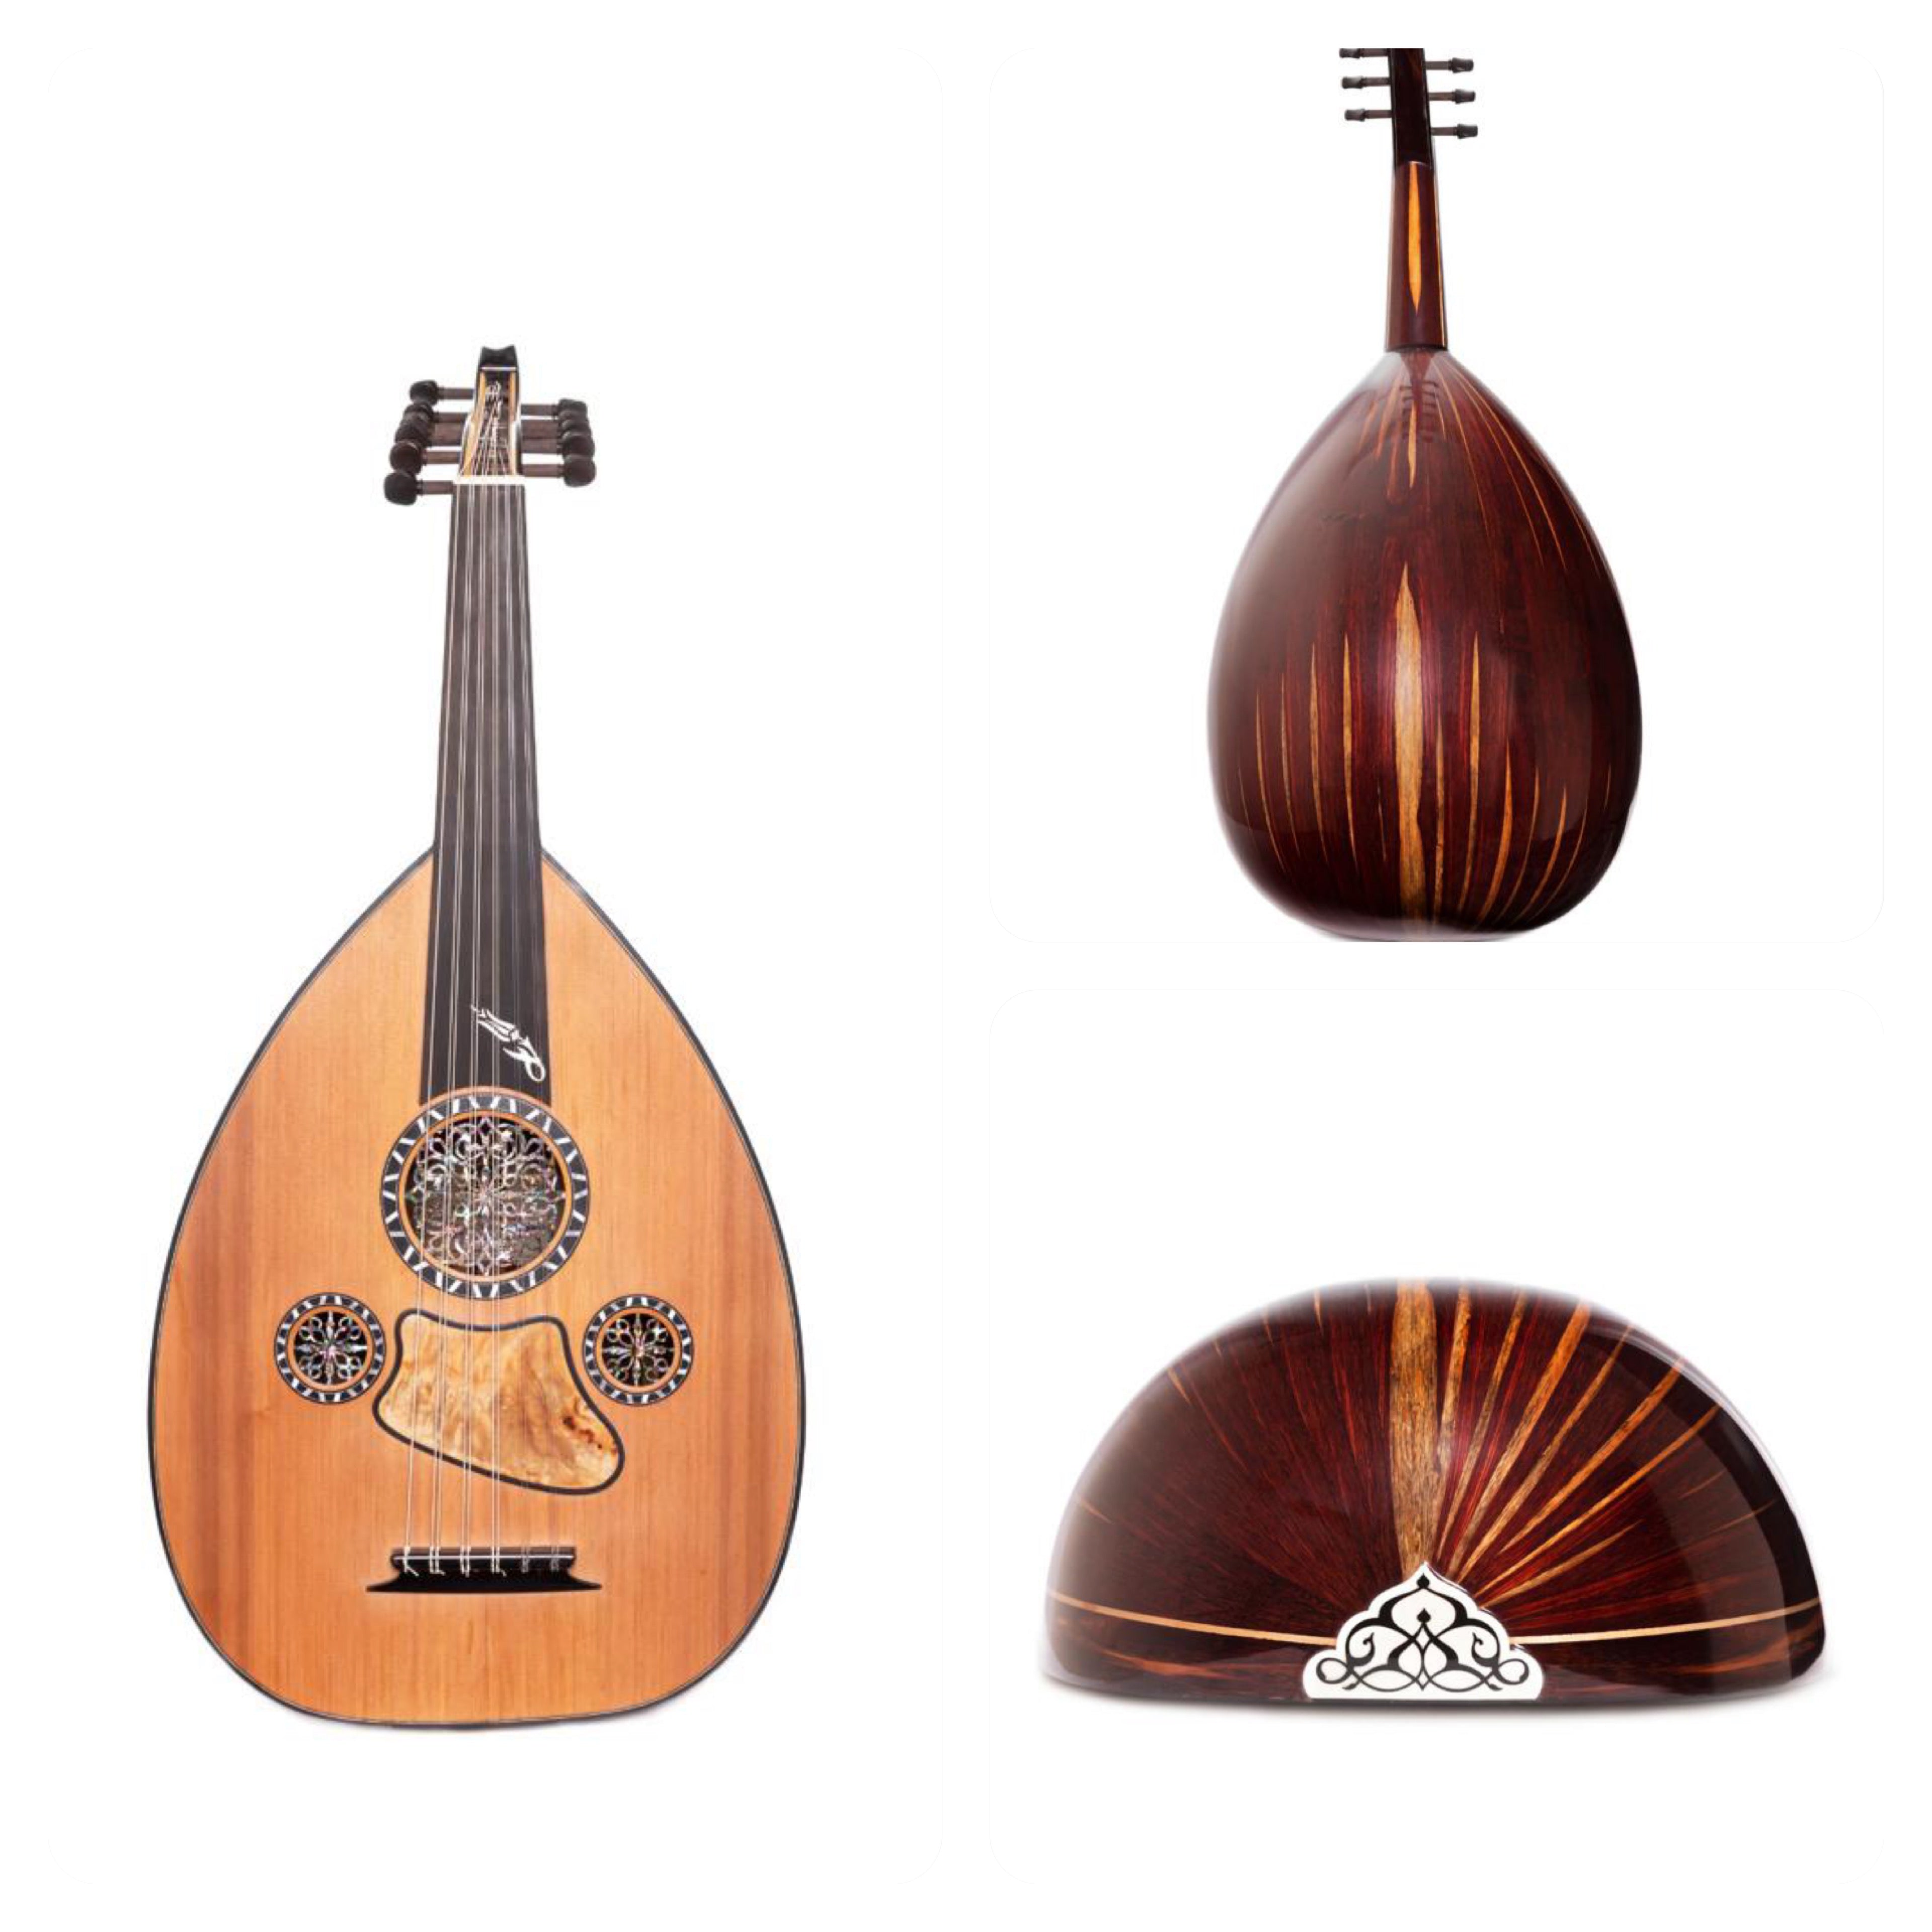 What is the best Oud for beginners?